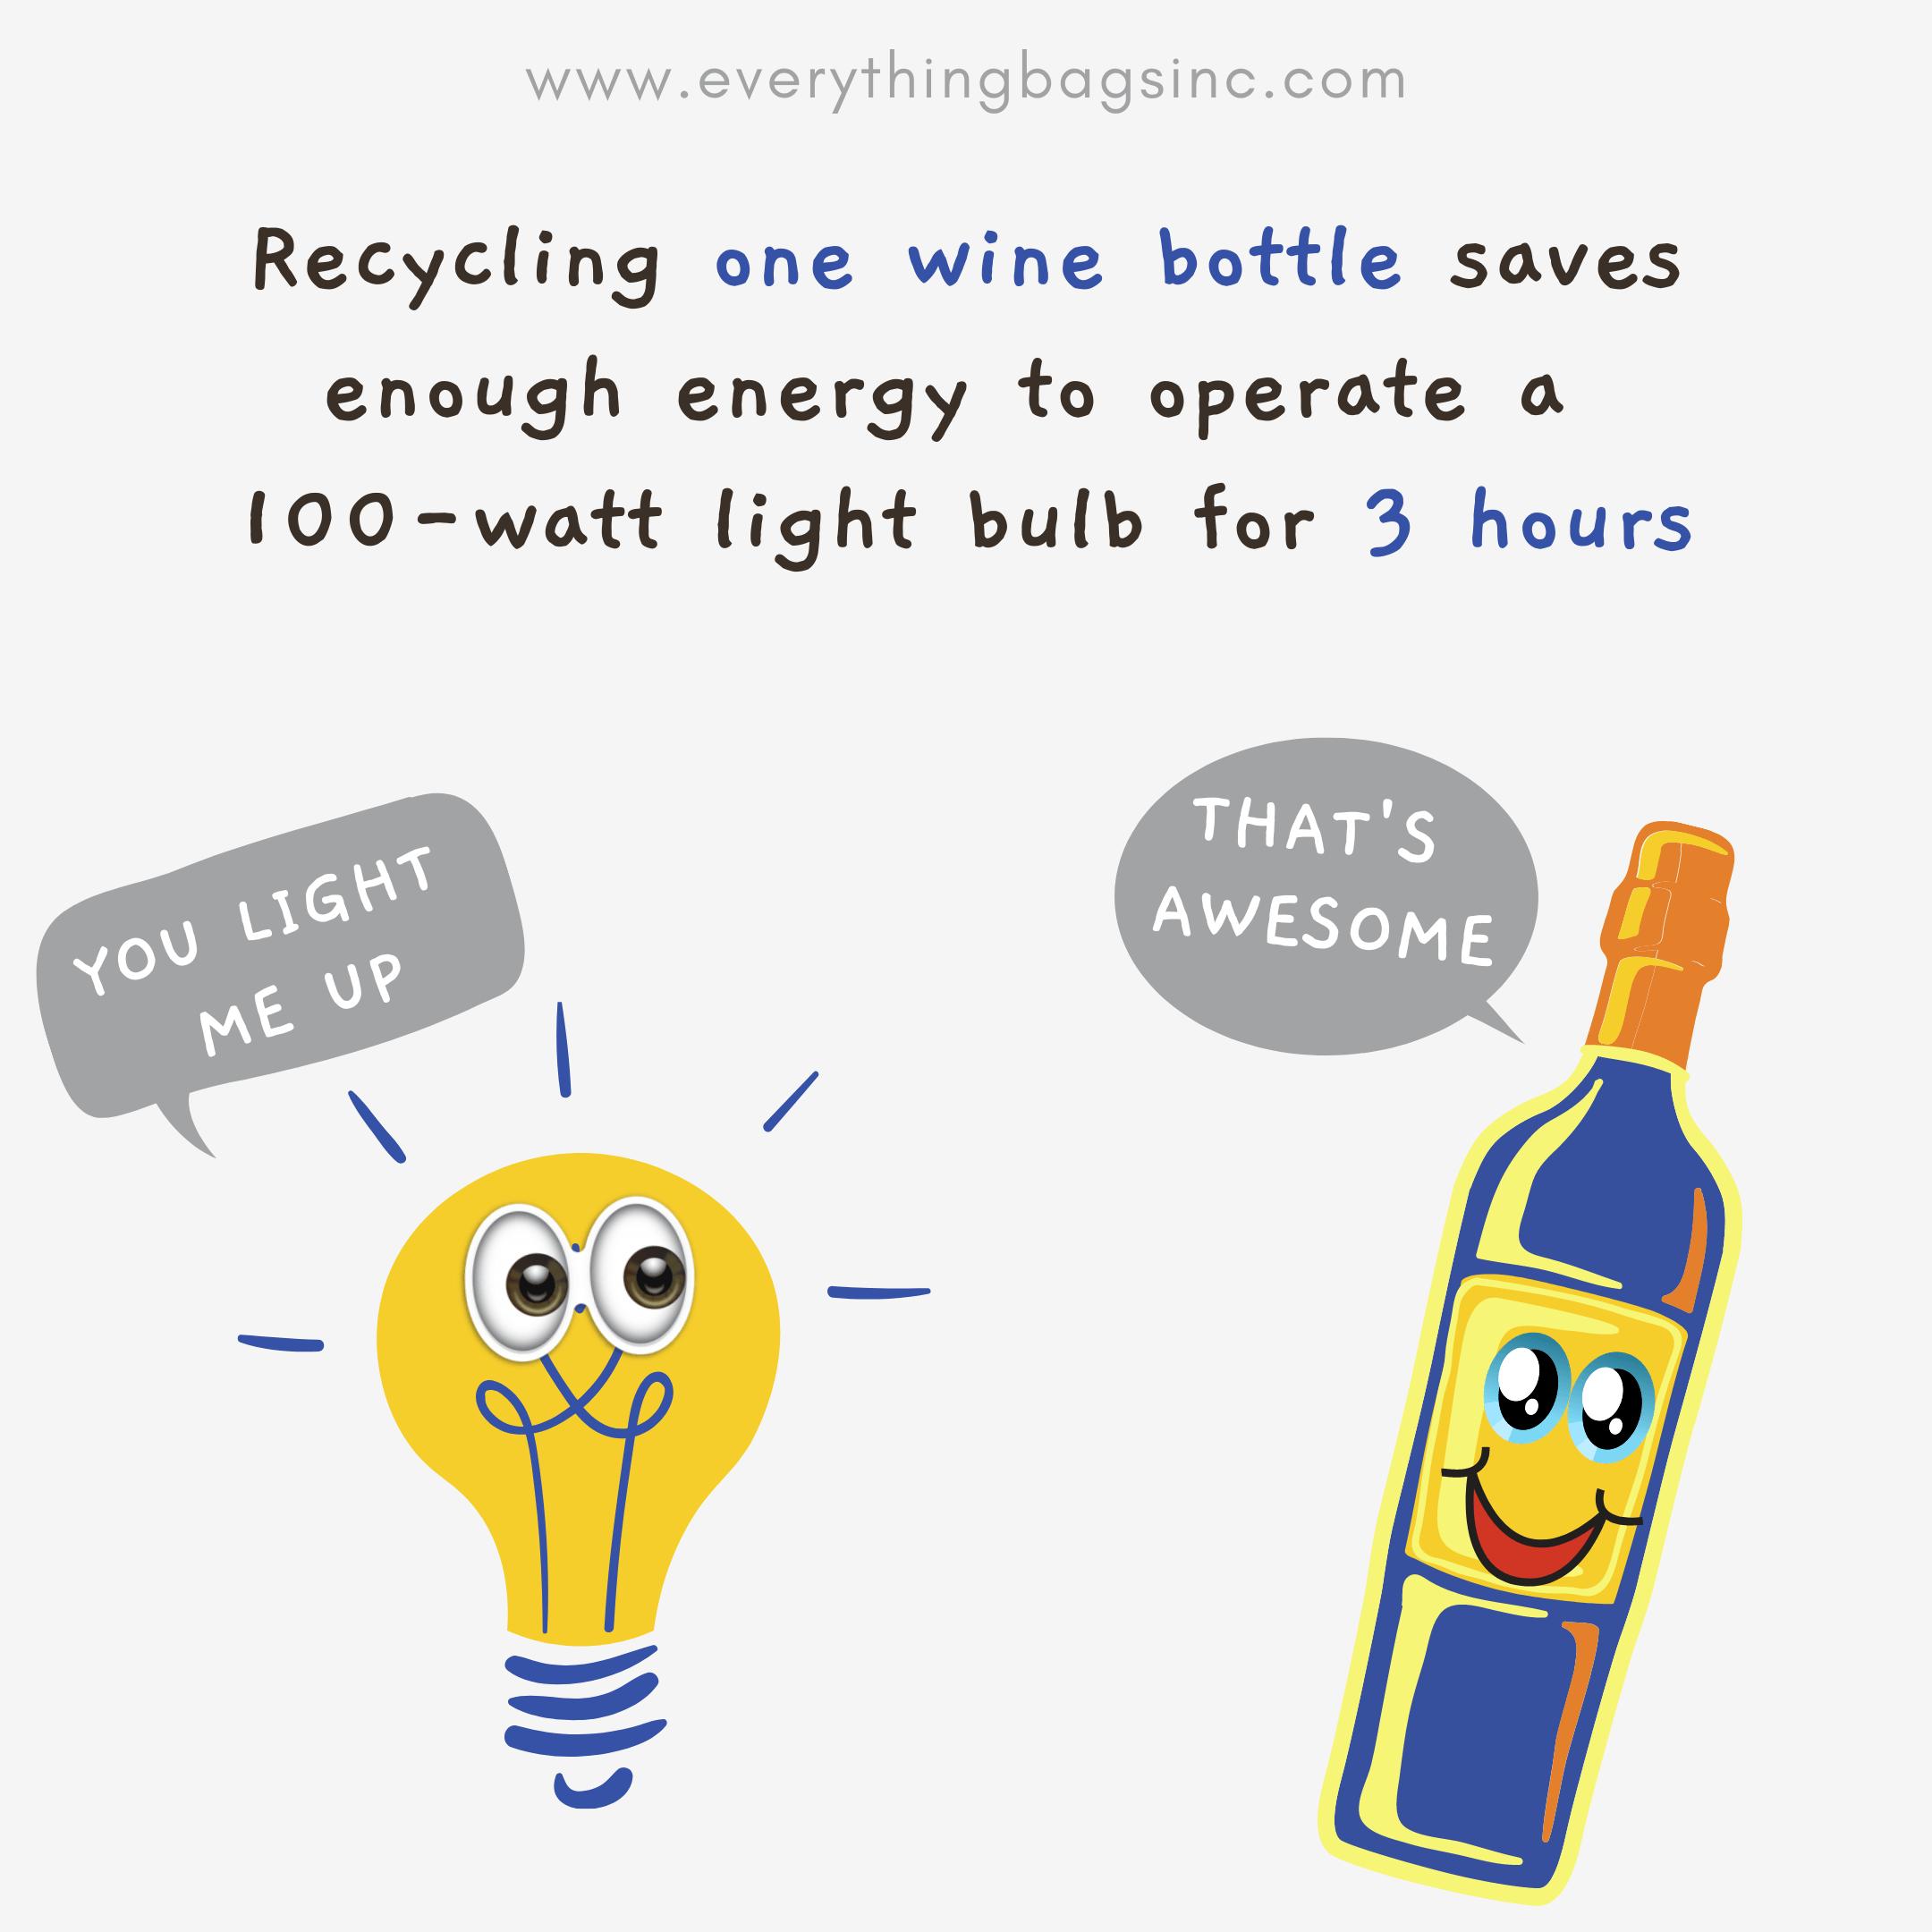 15 Fun Facts About Recycling (and Interesting Illustrations)